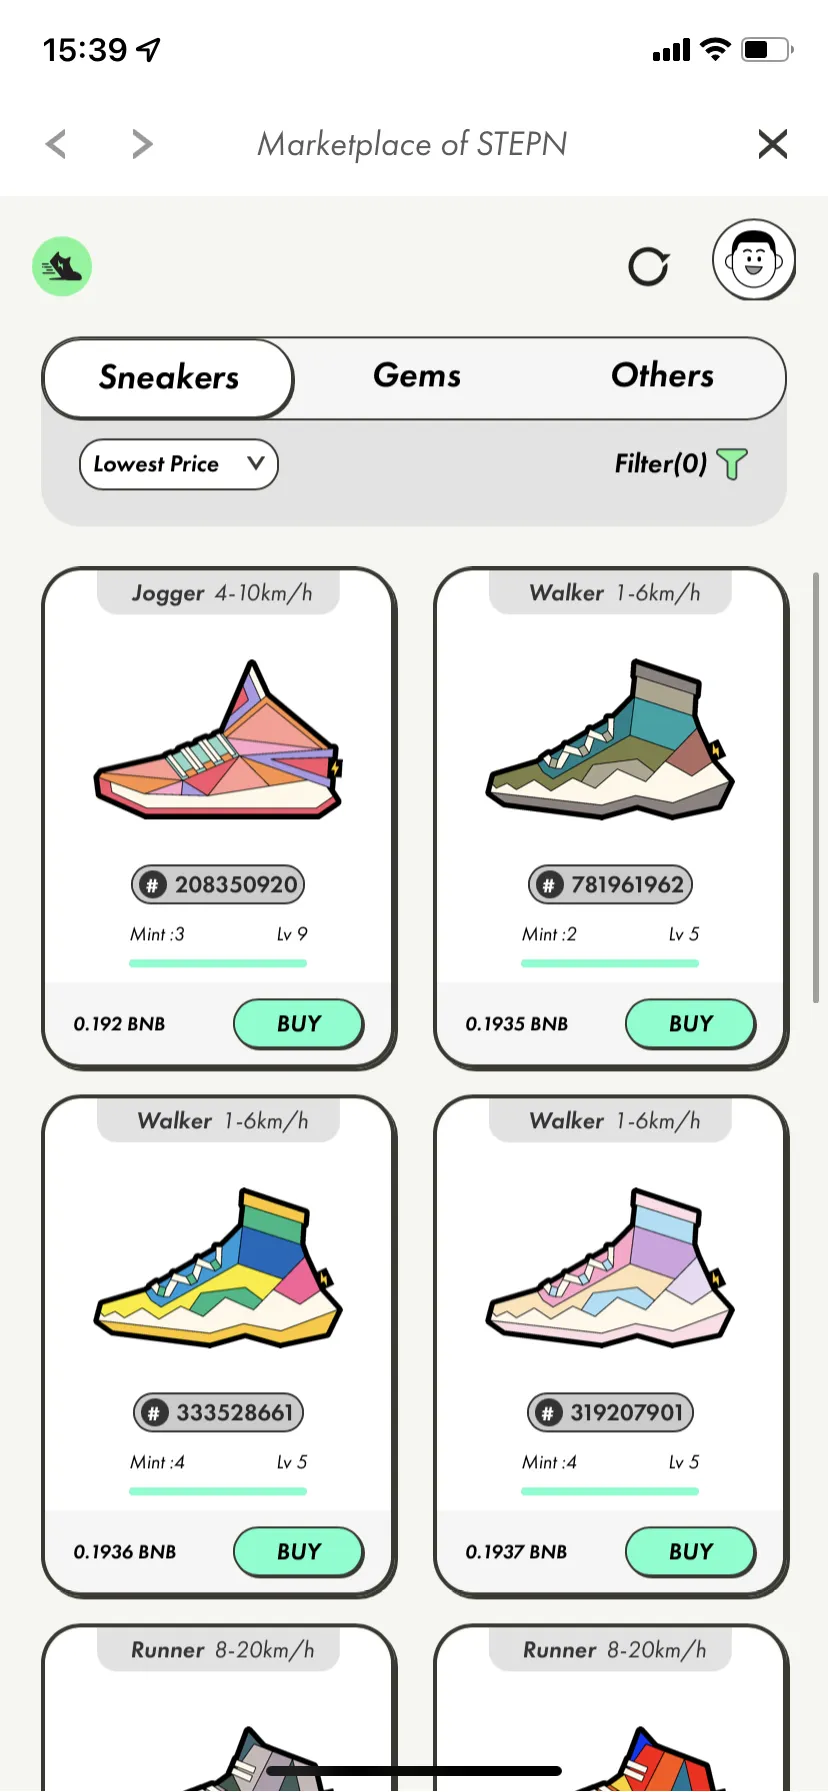 The marketplace (sneakers)